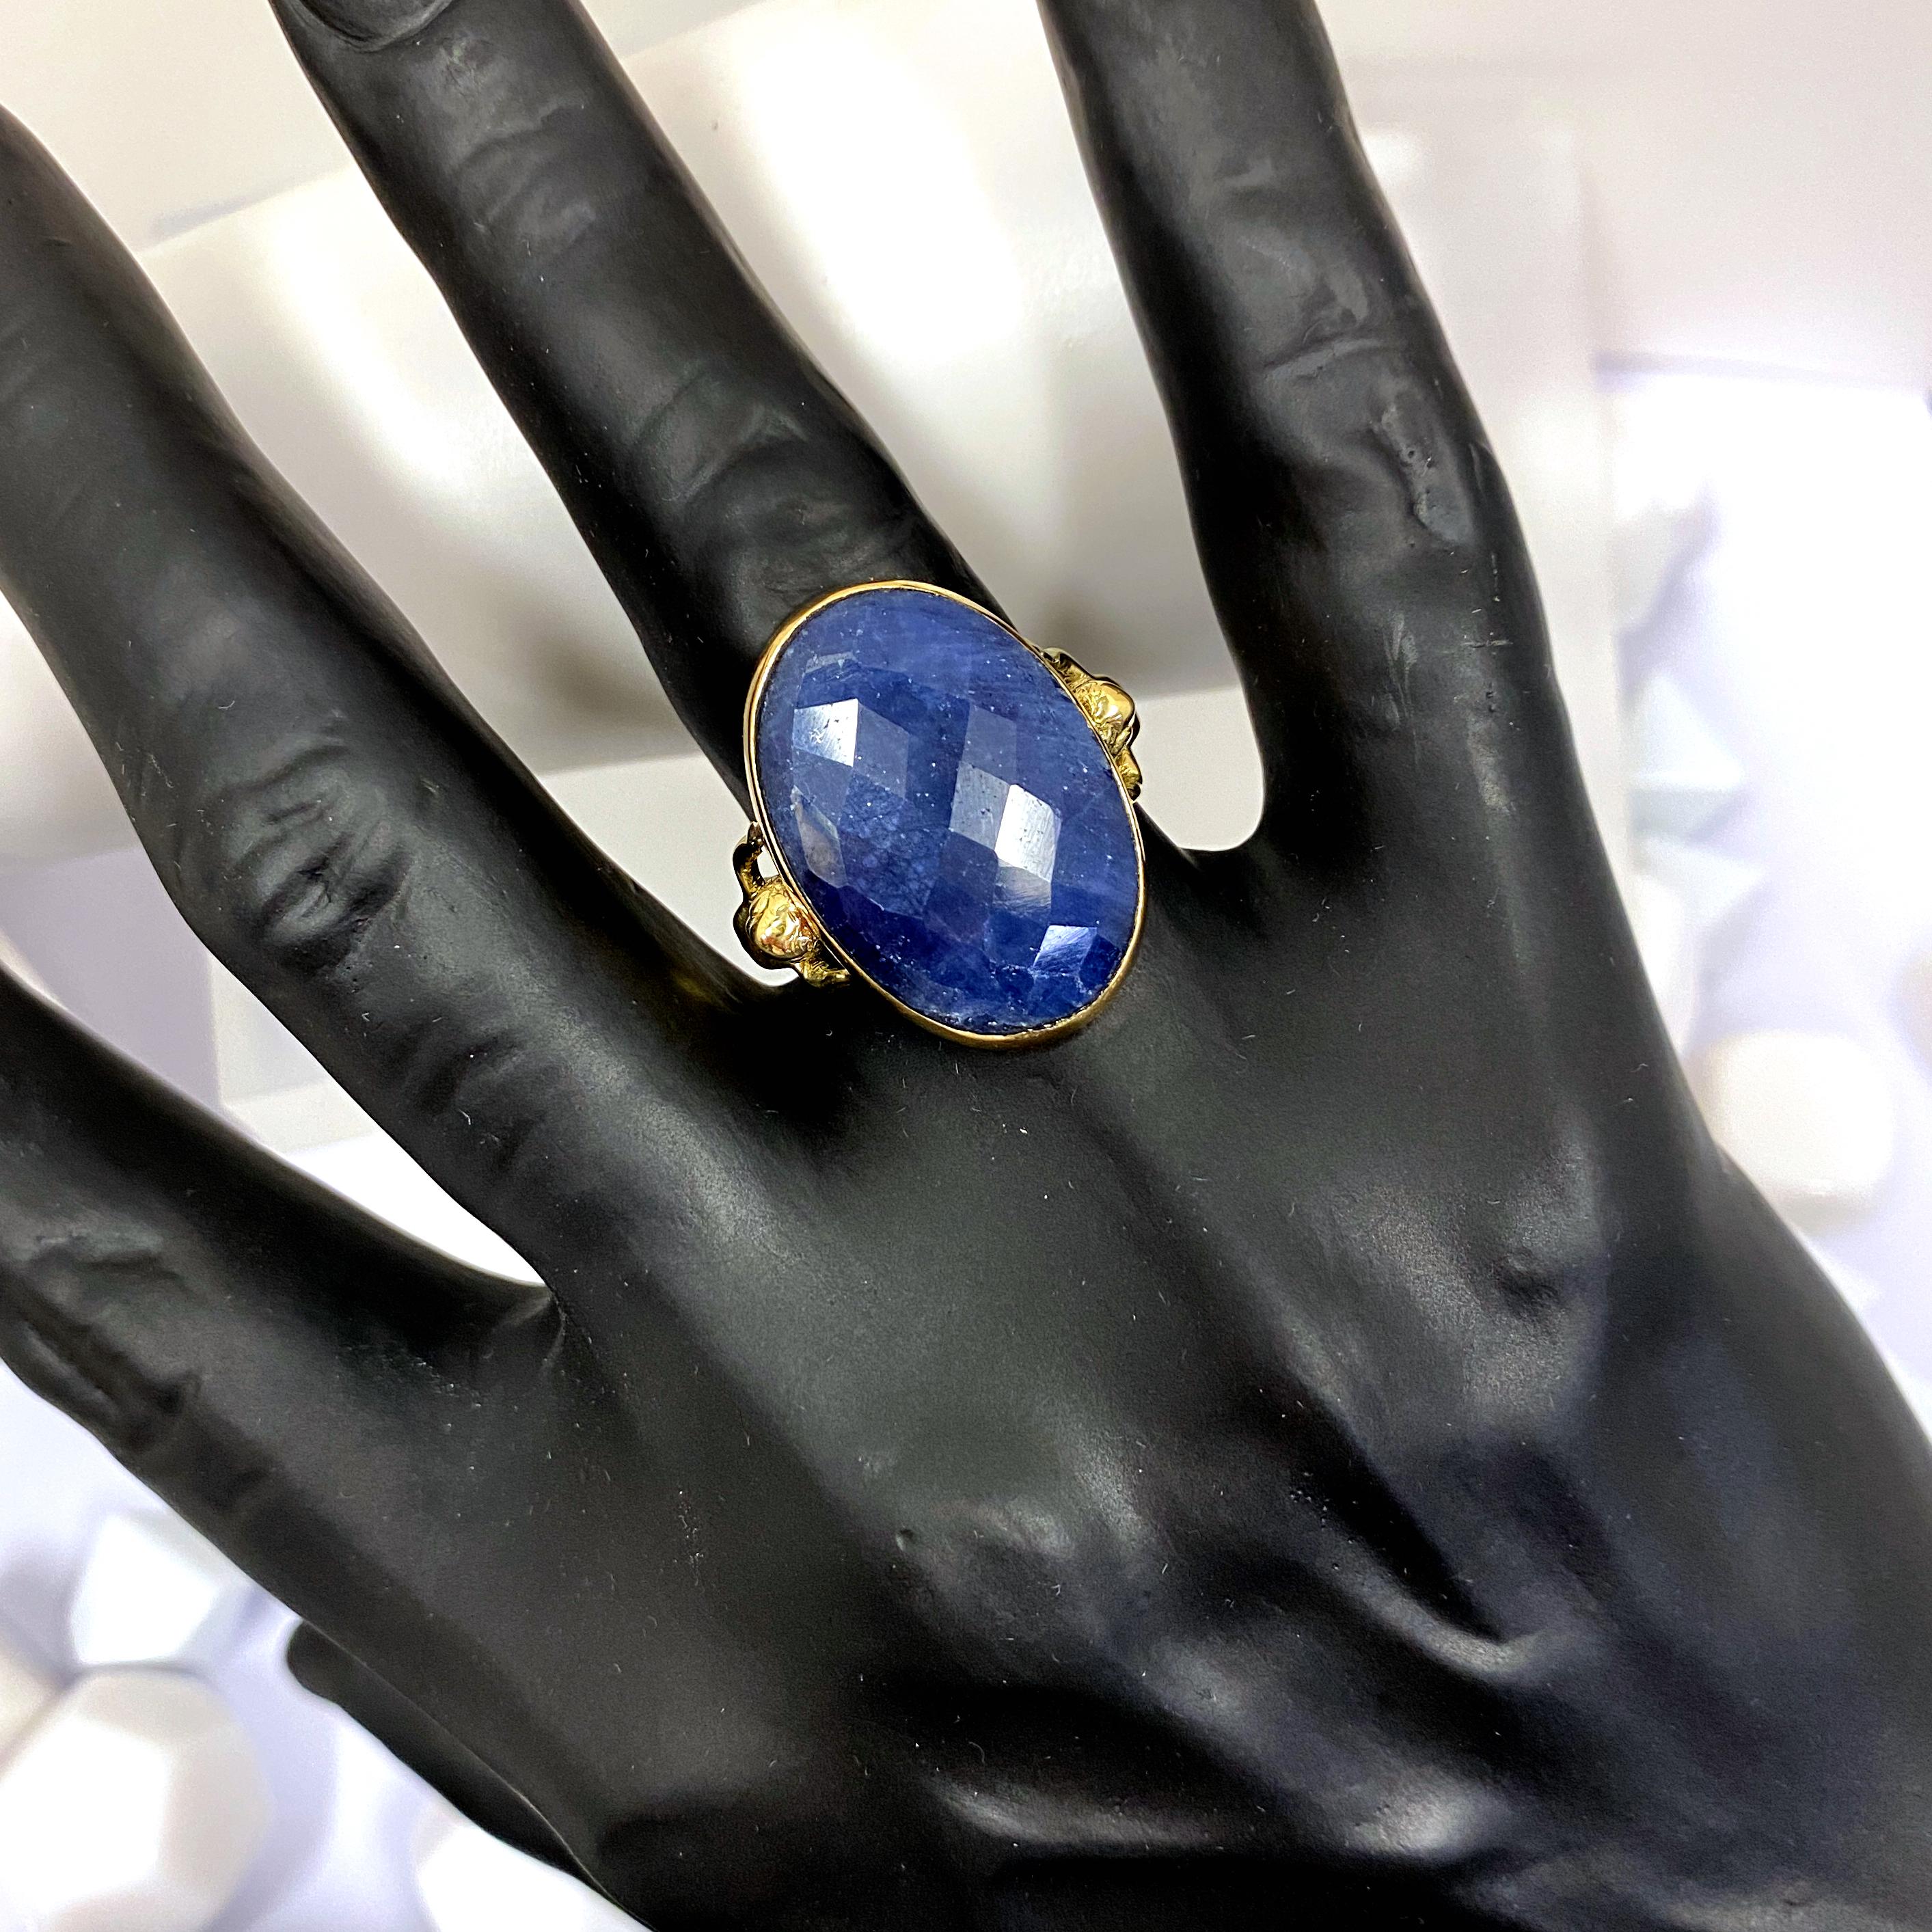 Cherub Figural Solitaire Ring with Rose Cut Sapphire in 18 Karat Yellow Gold For Sale 1